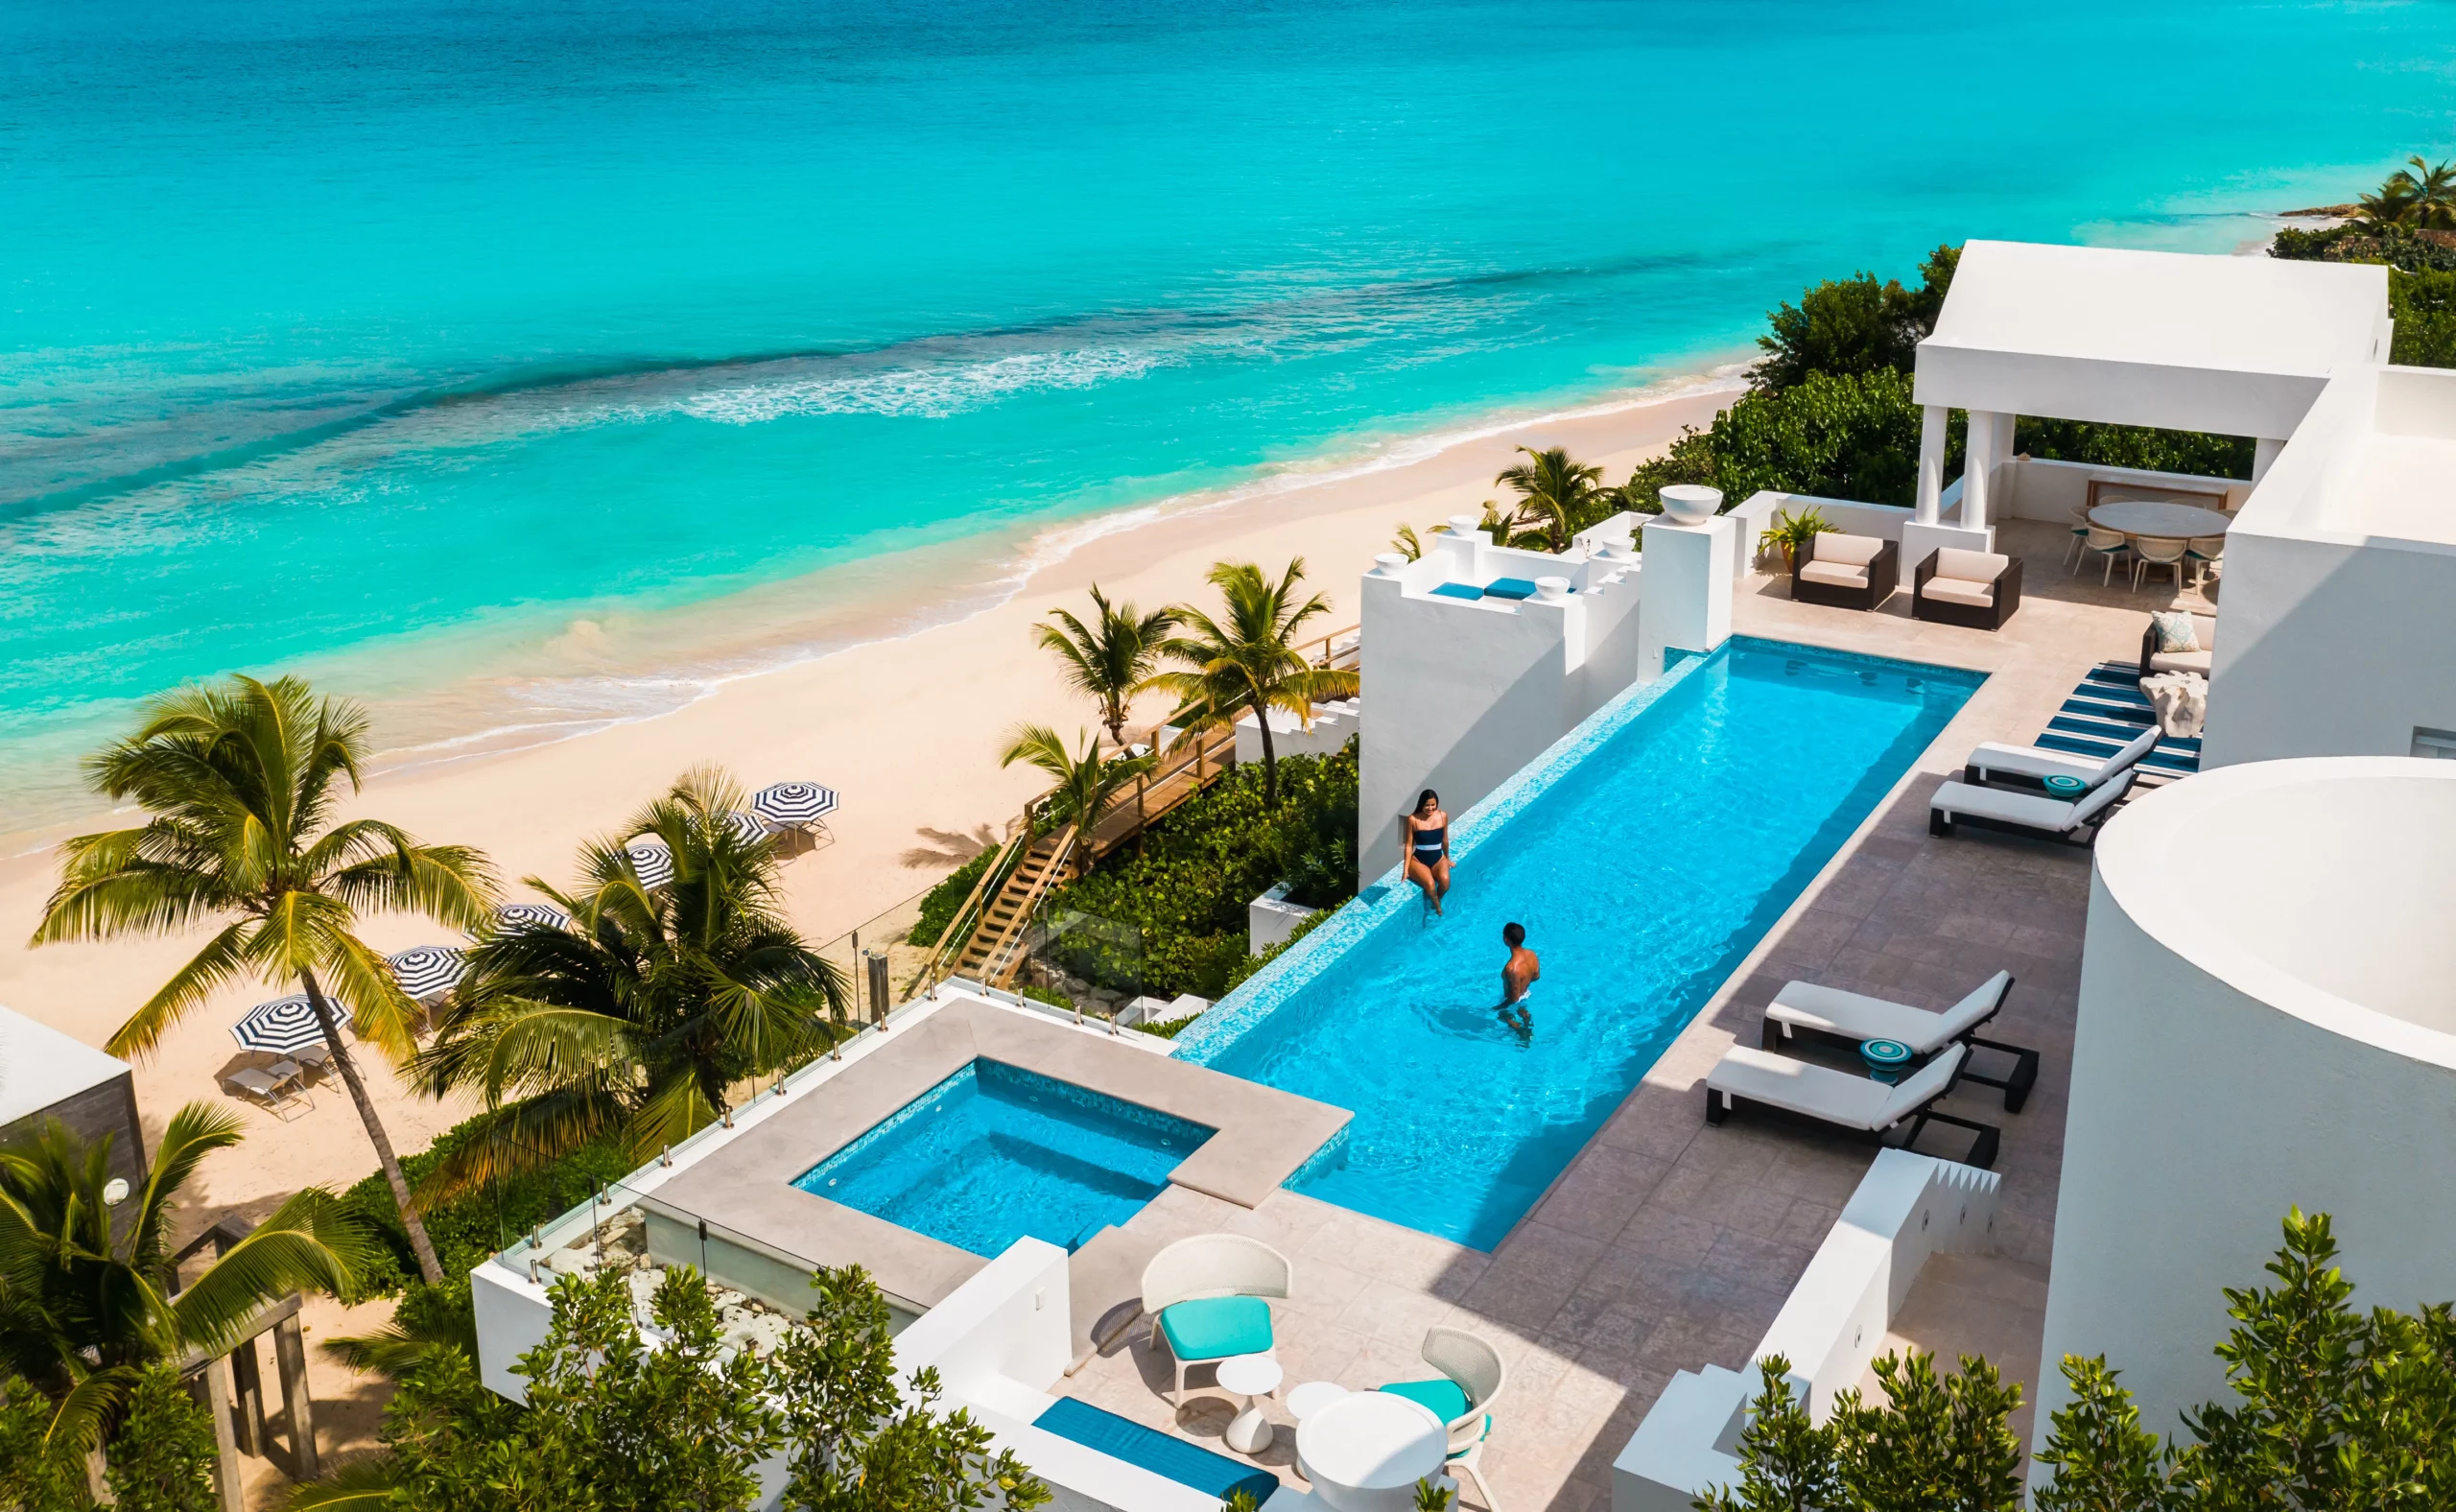 Why Choose a Beach Villa For Your Next Vacation